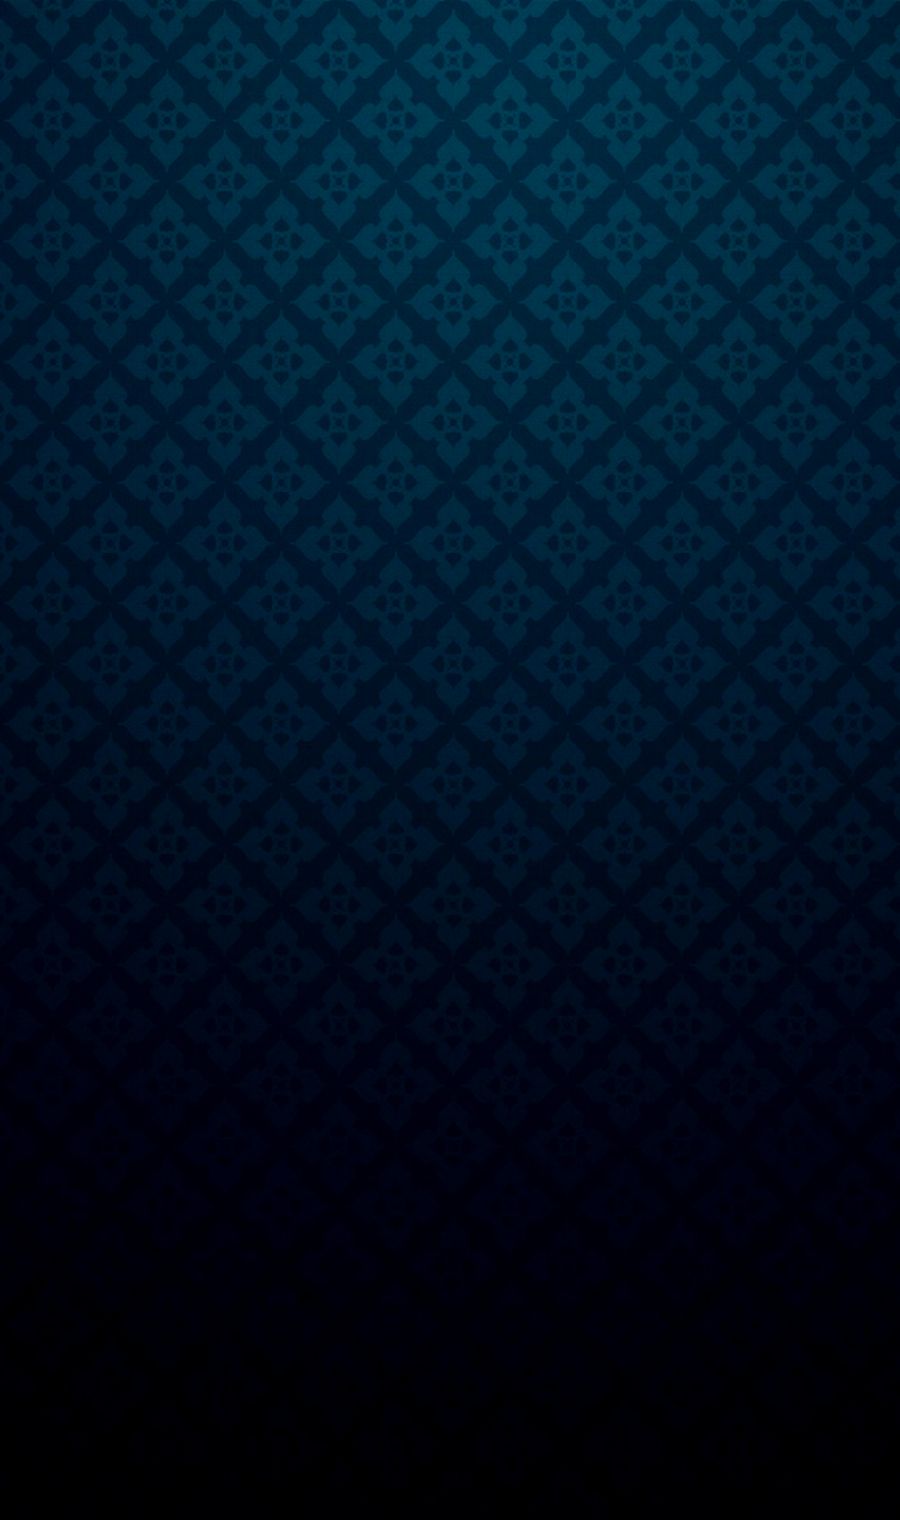 Blue Navy Floral Pattern Iphone 6 Plus Hd Wallpaper - Navy Blue Wallpaper  Iphone - 900x1520 Wallpaper 